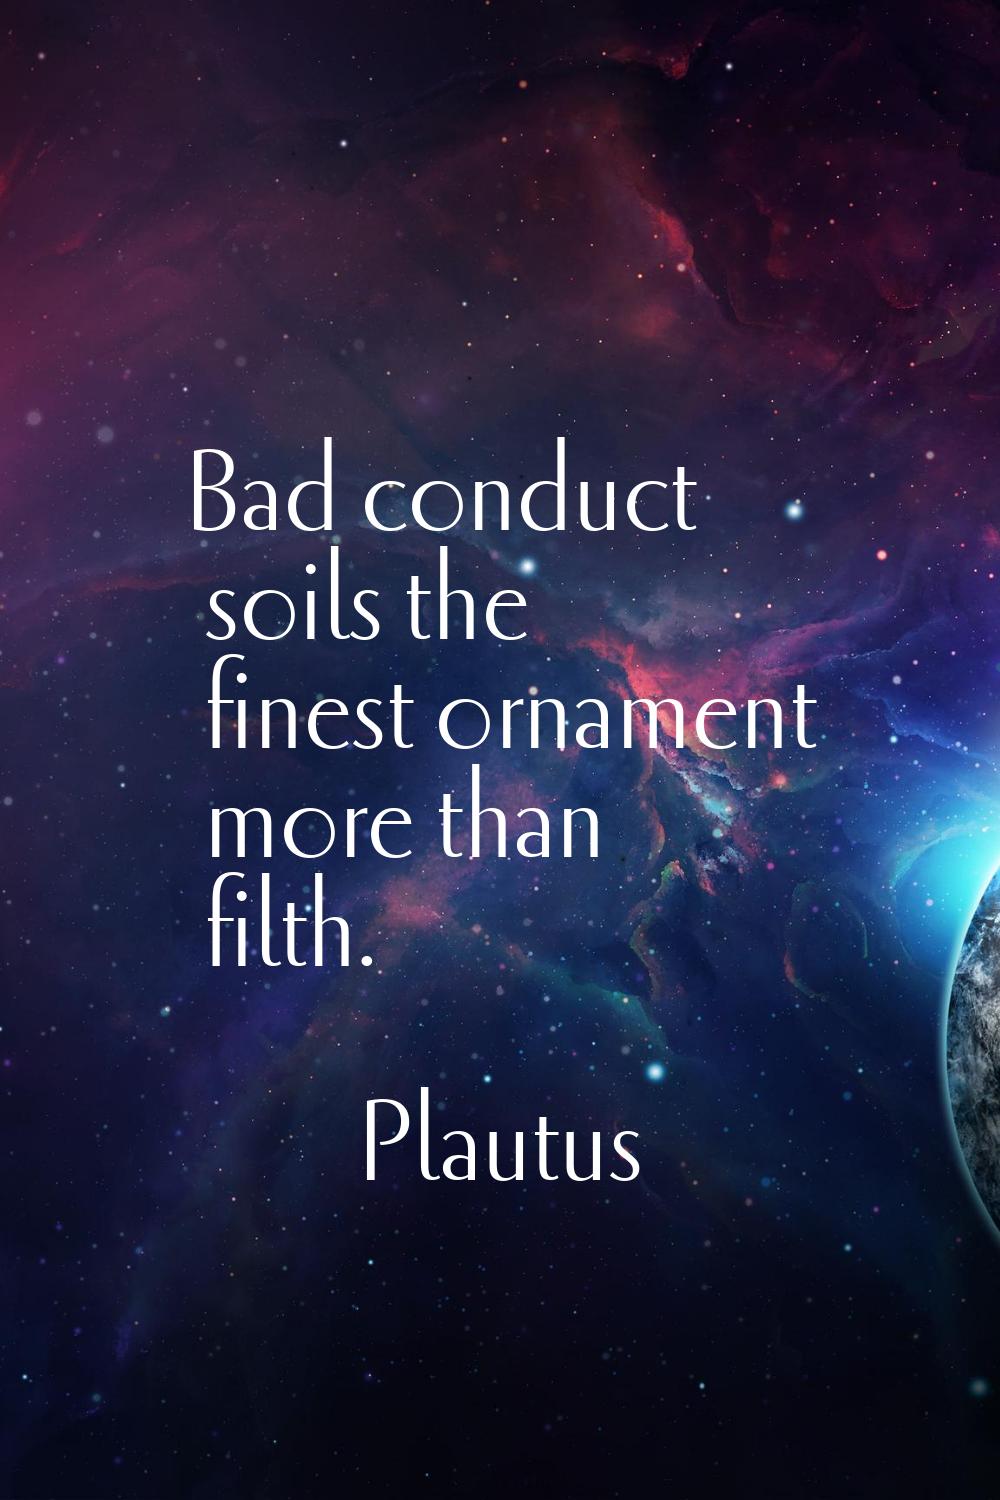 Bad conduct soils the finest ornament more than filth.